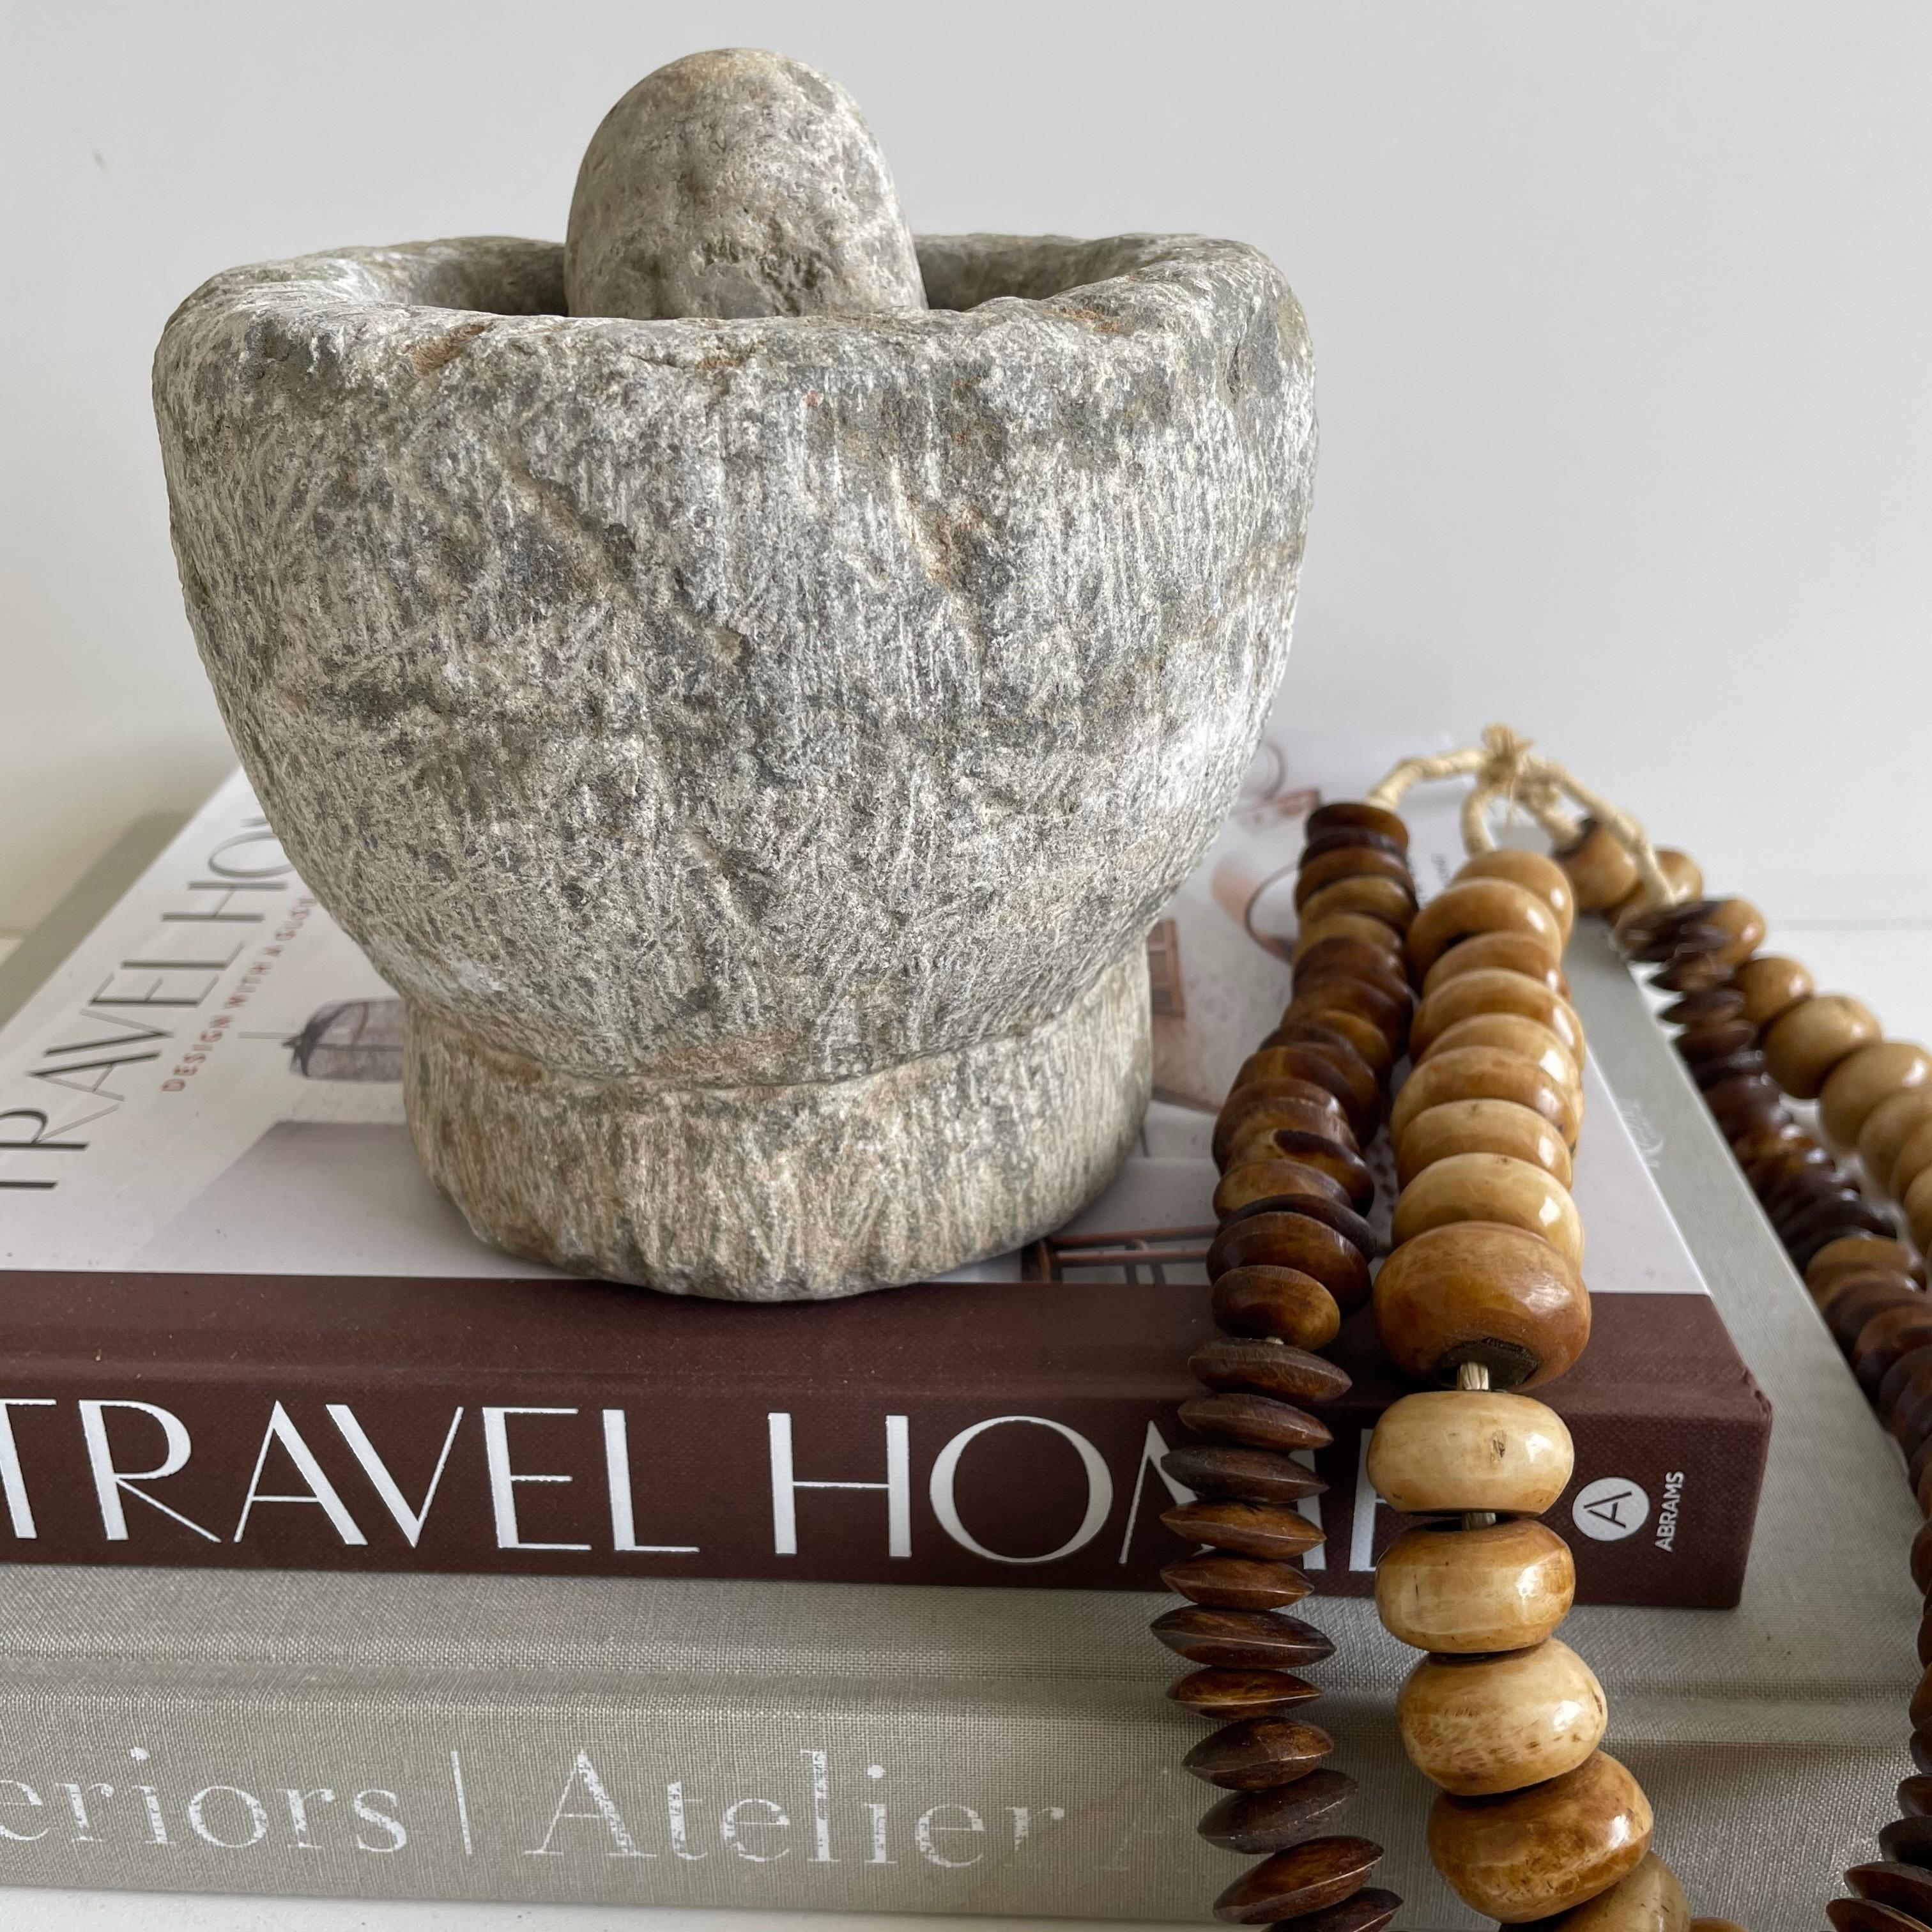 Antique stone mortar and pestle bowl set

Antique stone mortar and pestle bowl set, great decorative item, or can be used.
Accessories not included
Size: 6 x 6 x 5.